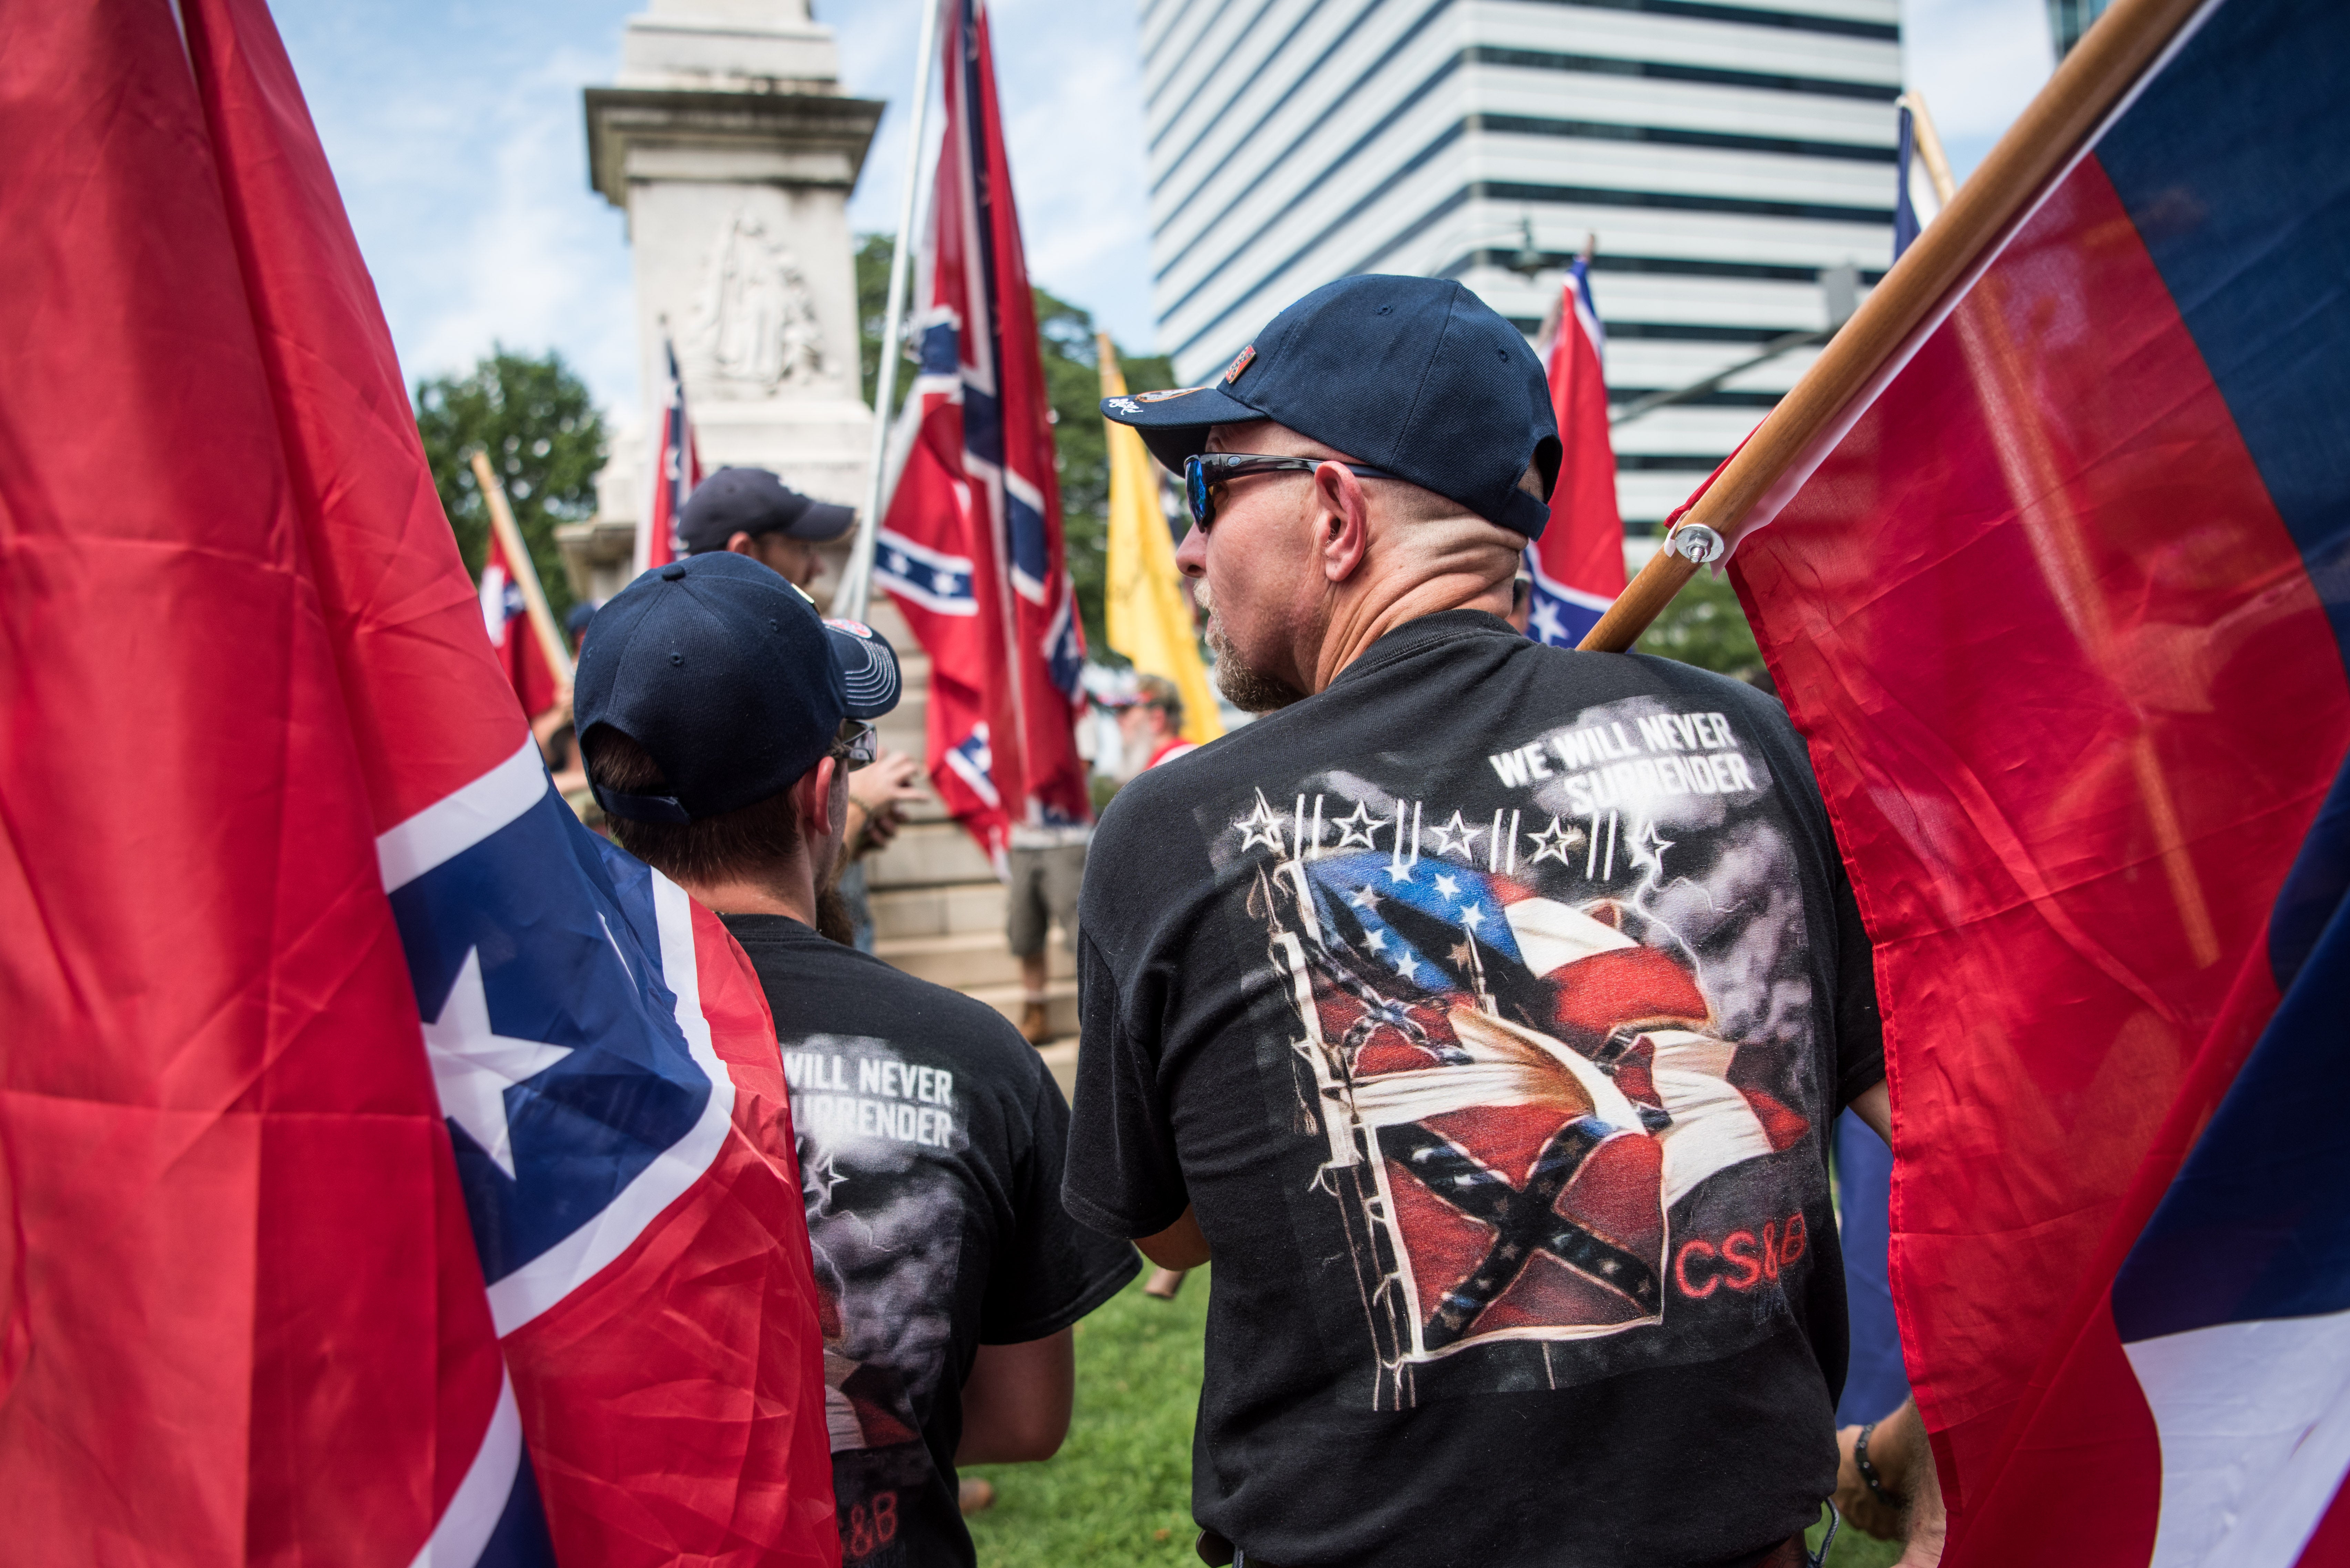 23 Photos From This Week That Prove White Supremacy Is Alive And Well
